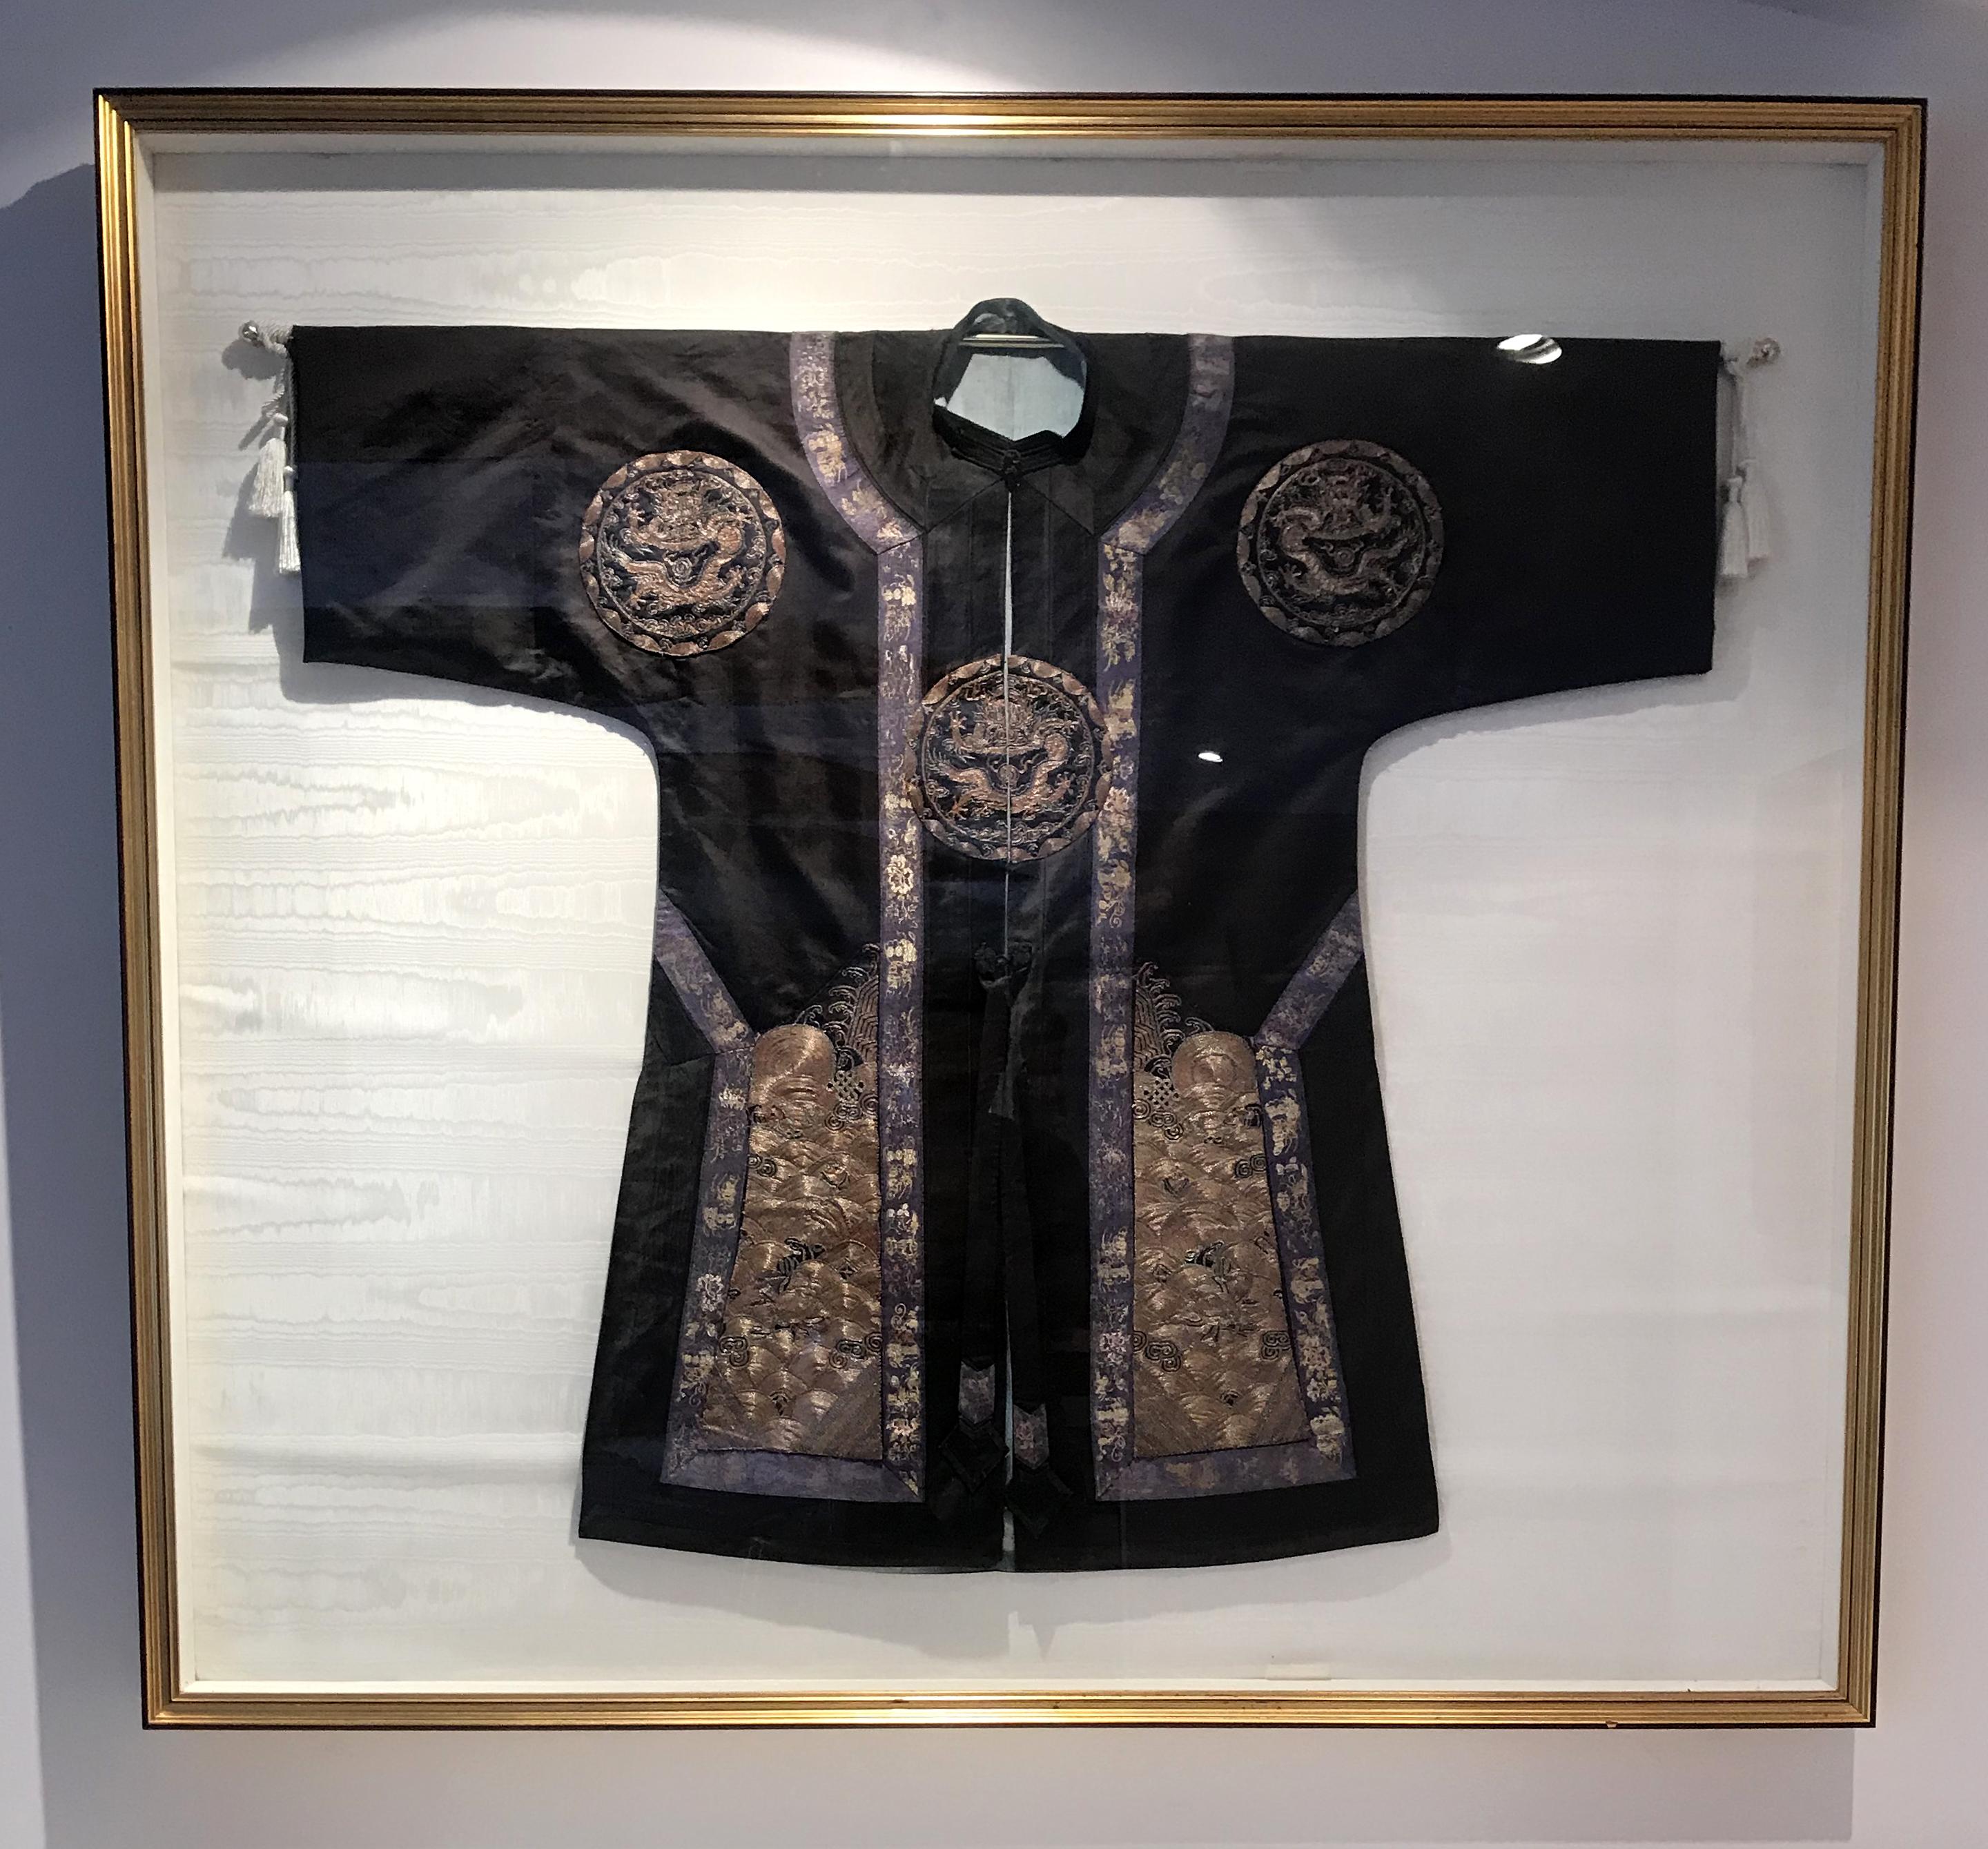 Metallic Thread Framed Antique Chinese Silk Robe with Dragon Roundel Design For Sale